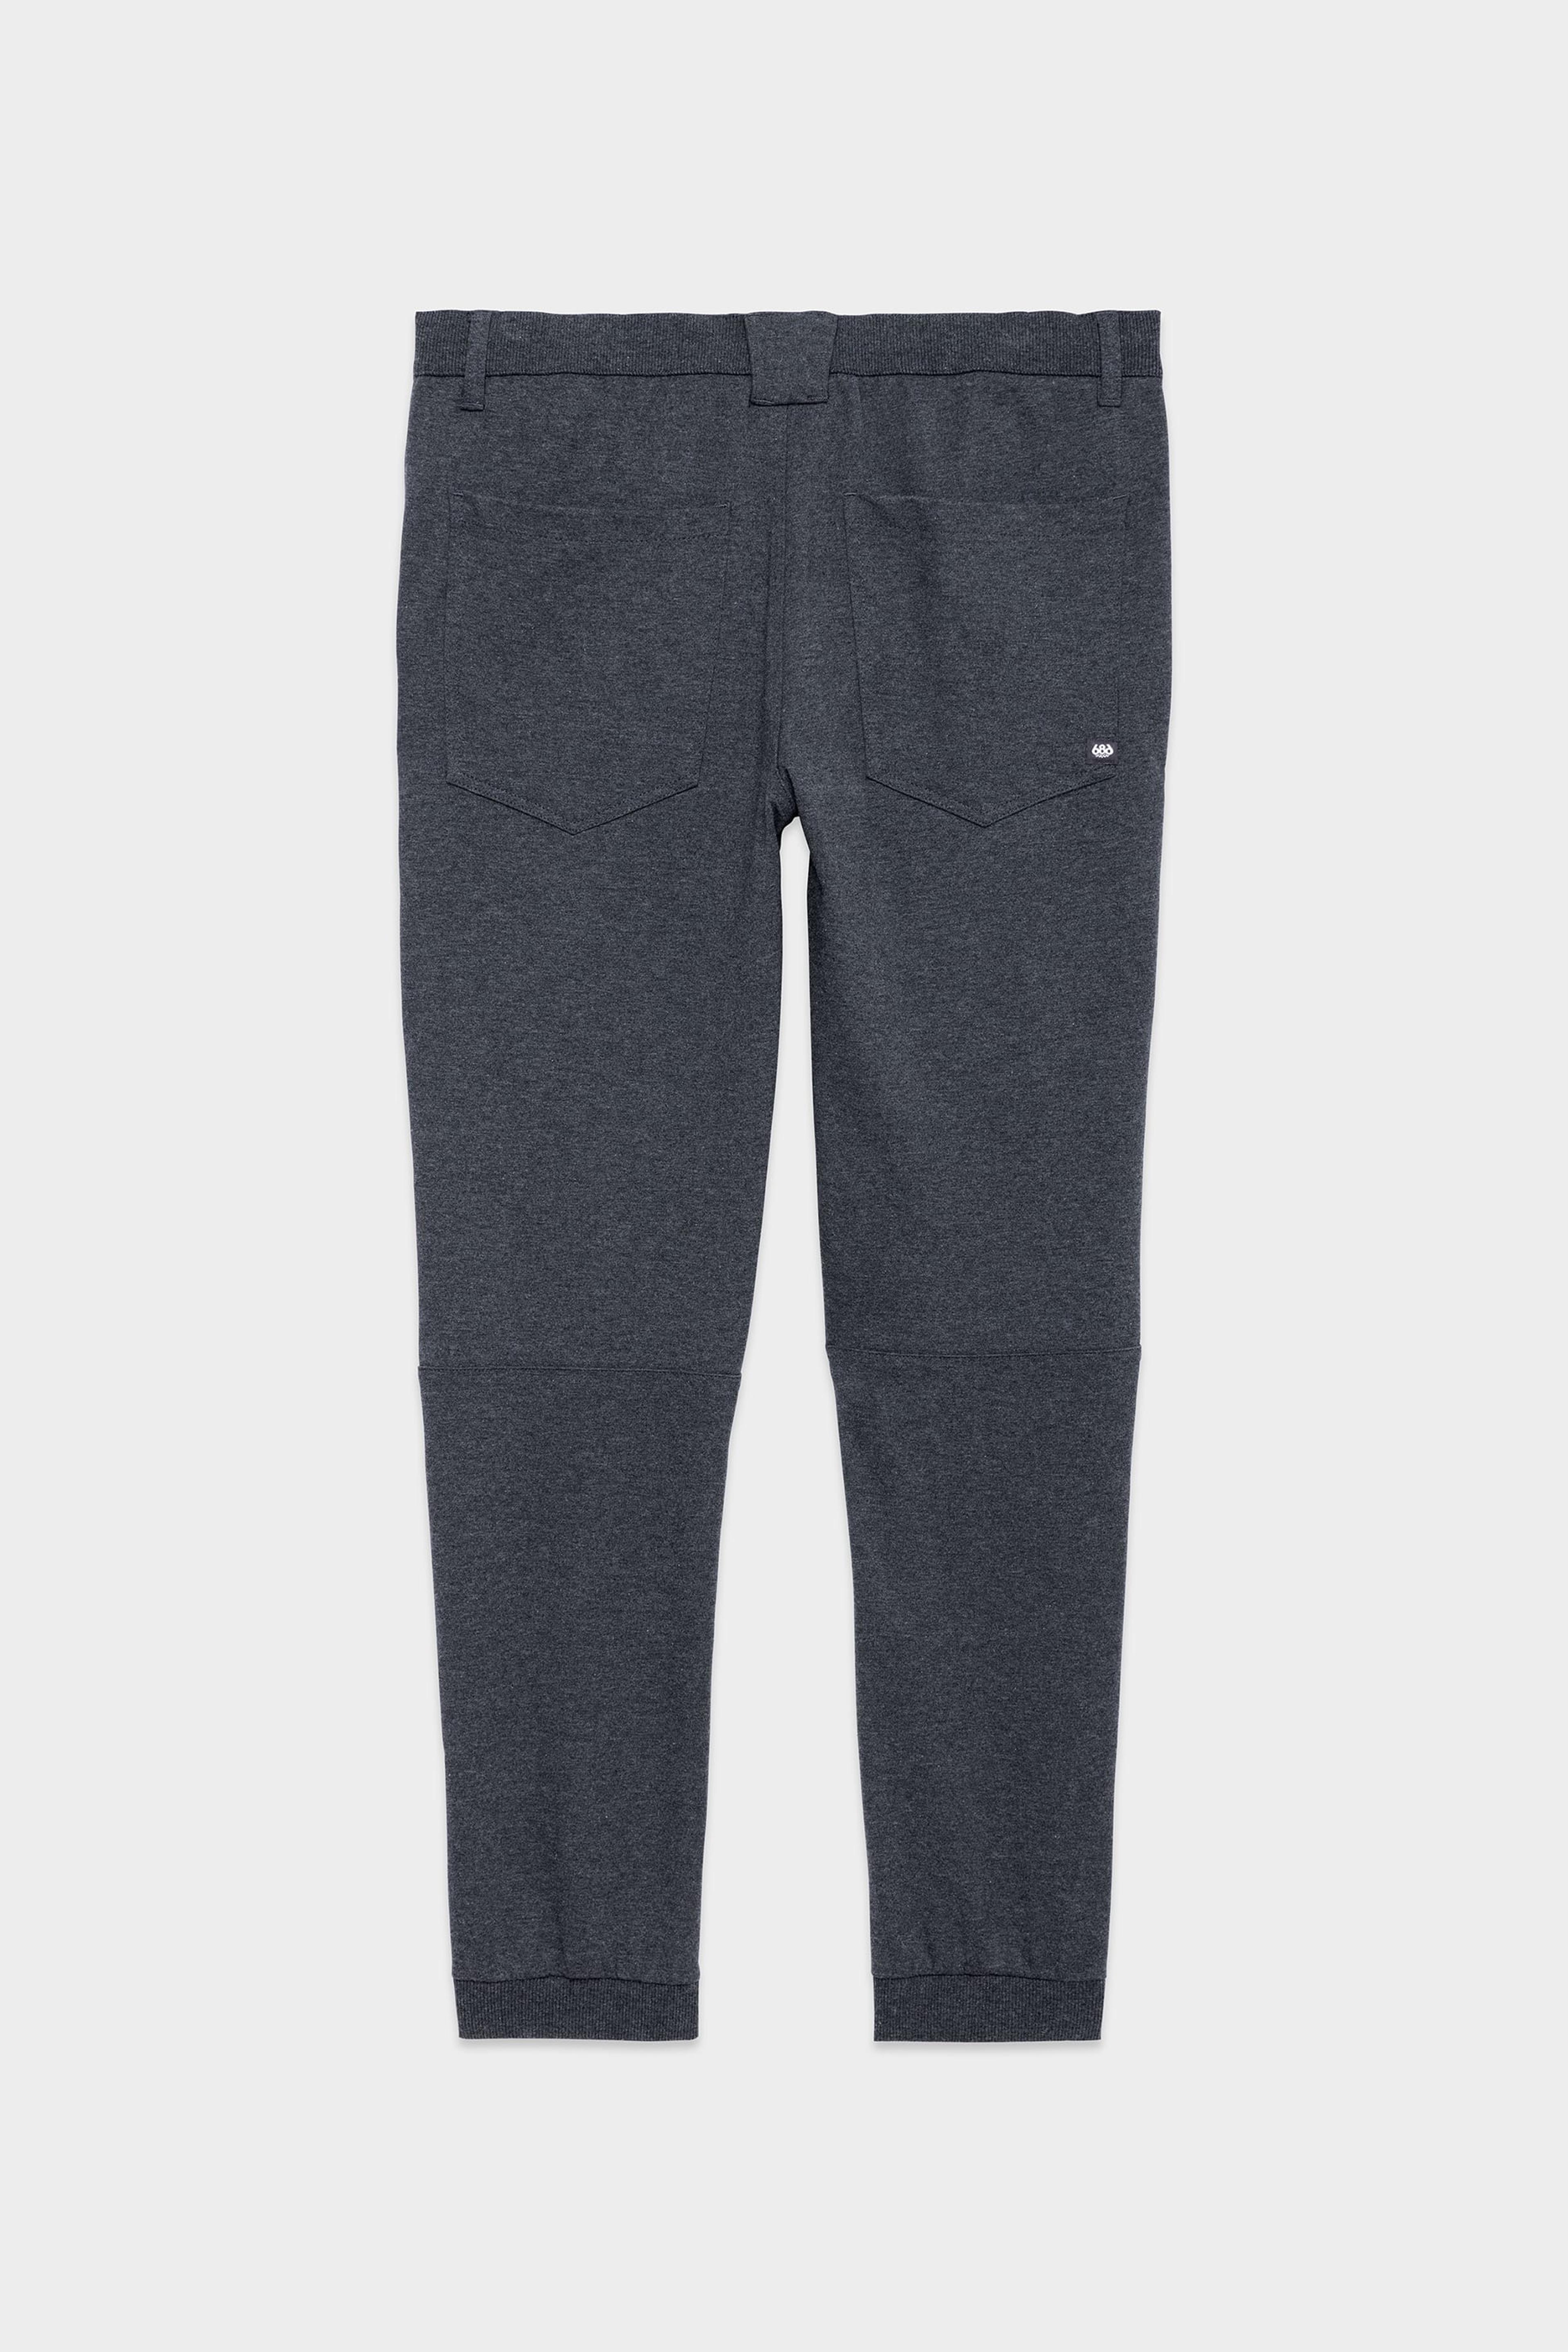 Alternate View 19 of 686 Men's Everywhere Double Knit Pant